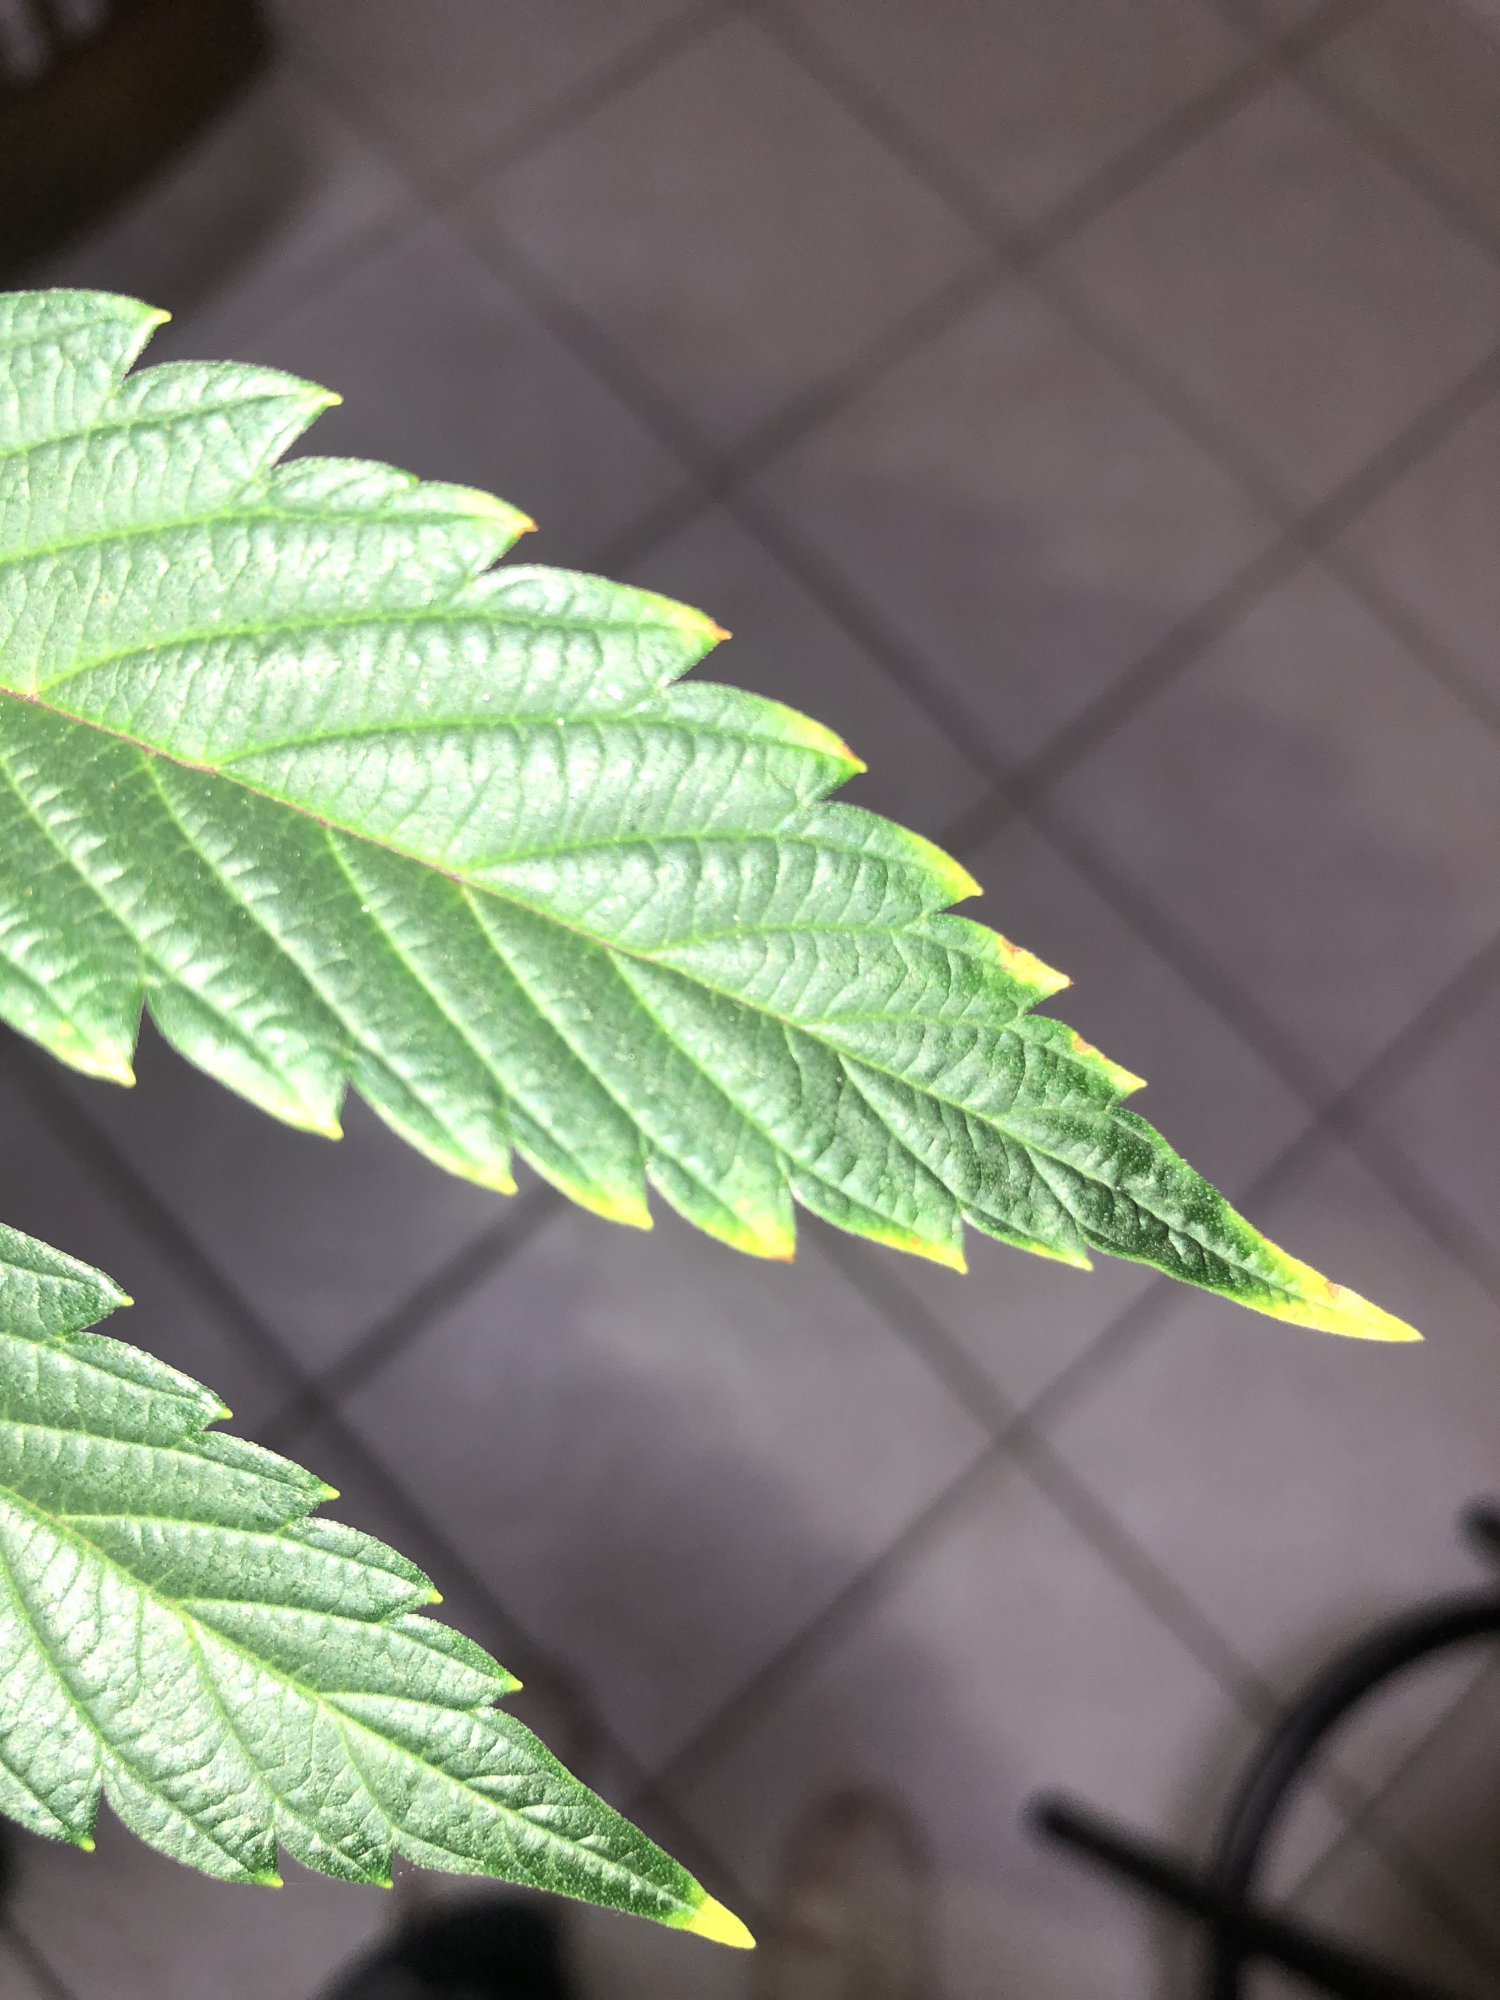 What kind of deficiency or pest is causing this